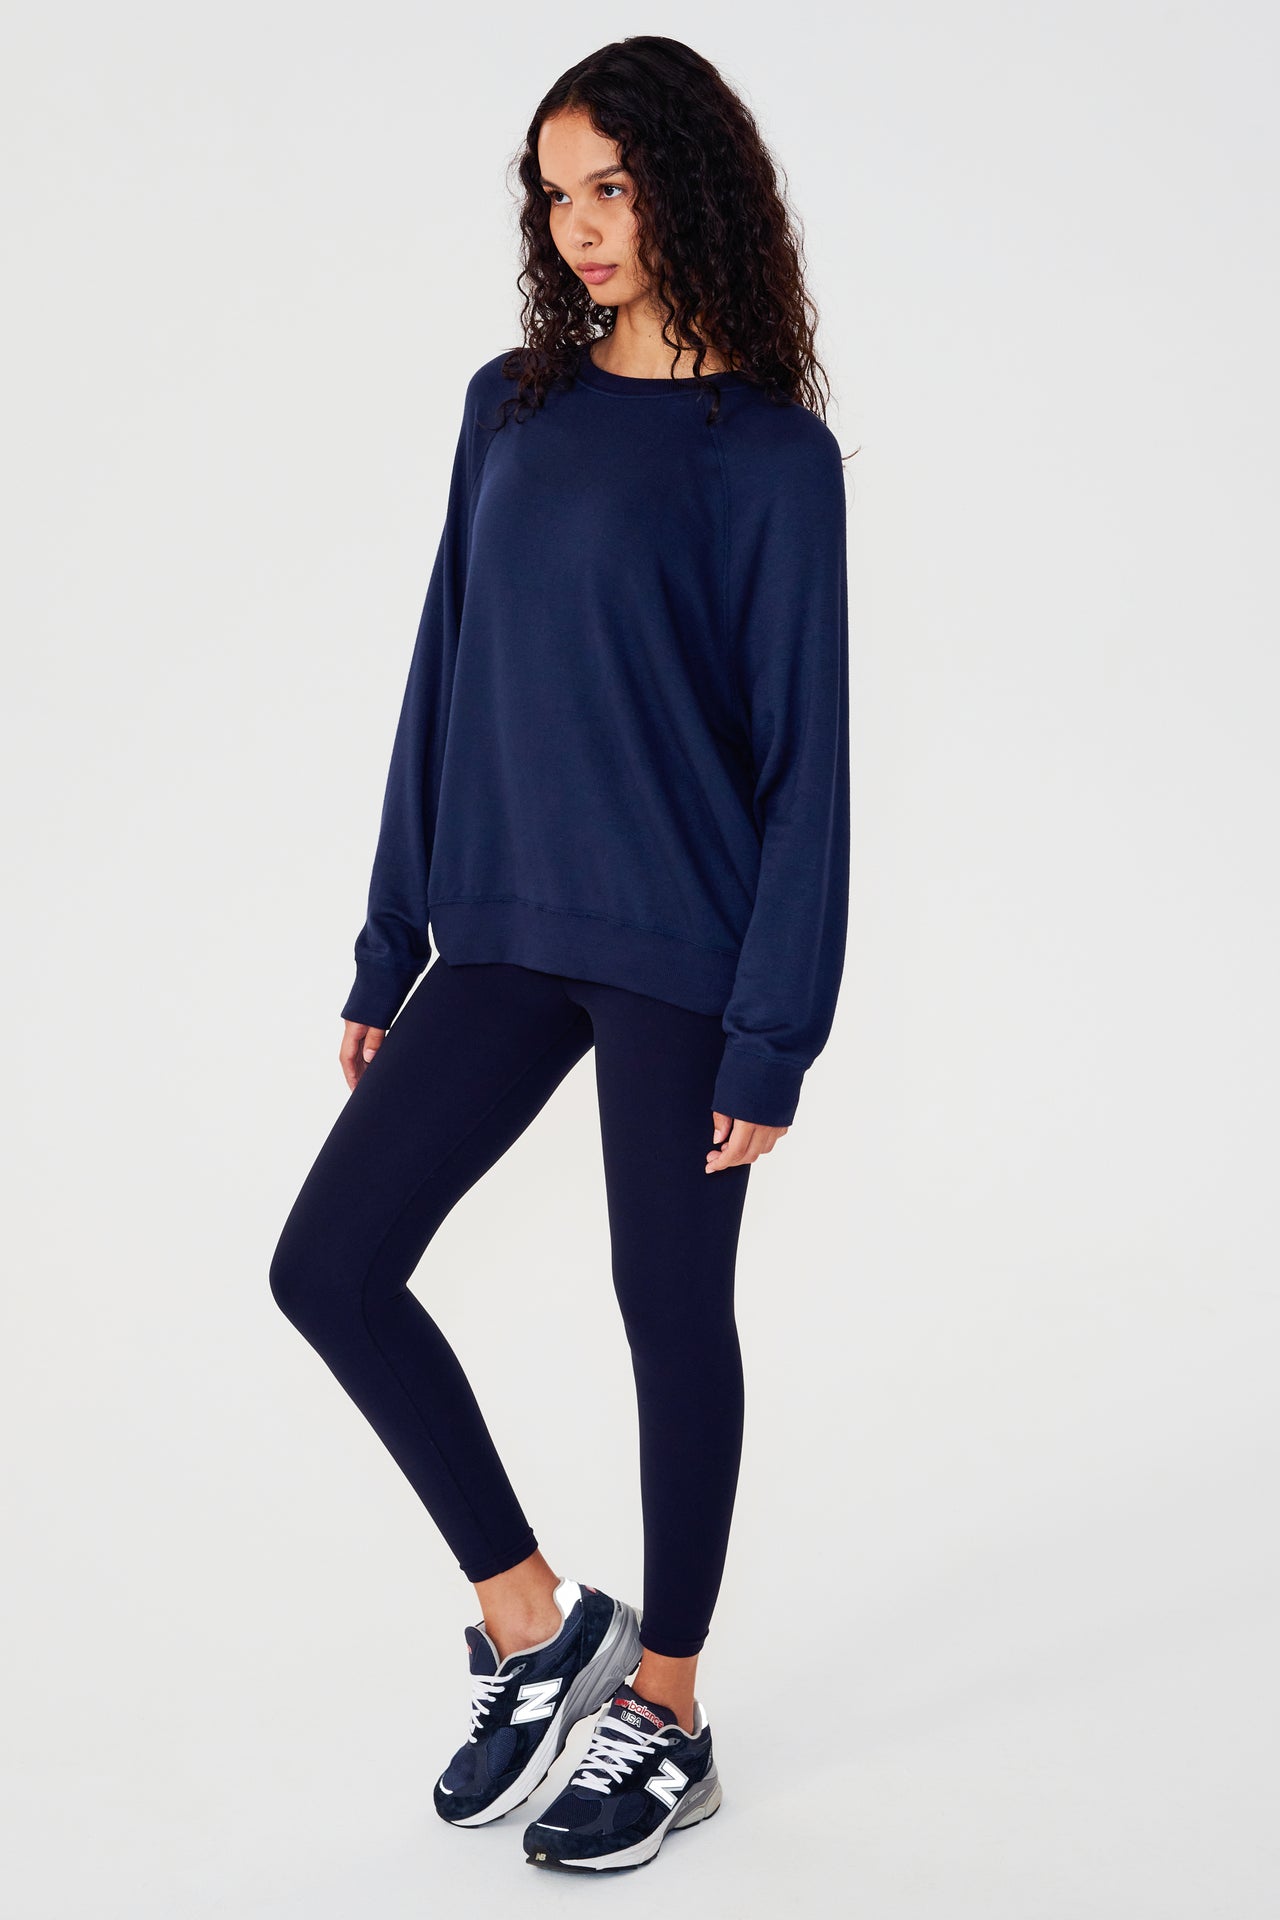 Full side view of girl wearing dark blue sweatshirt with visible stitching and ribbed hem, with dark blue leggings and dark blue shoes